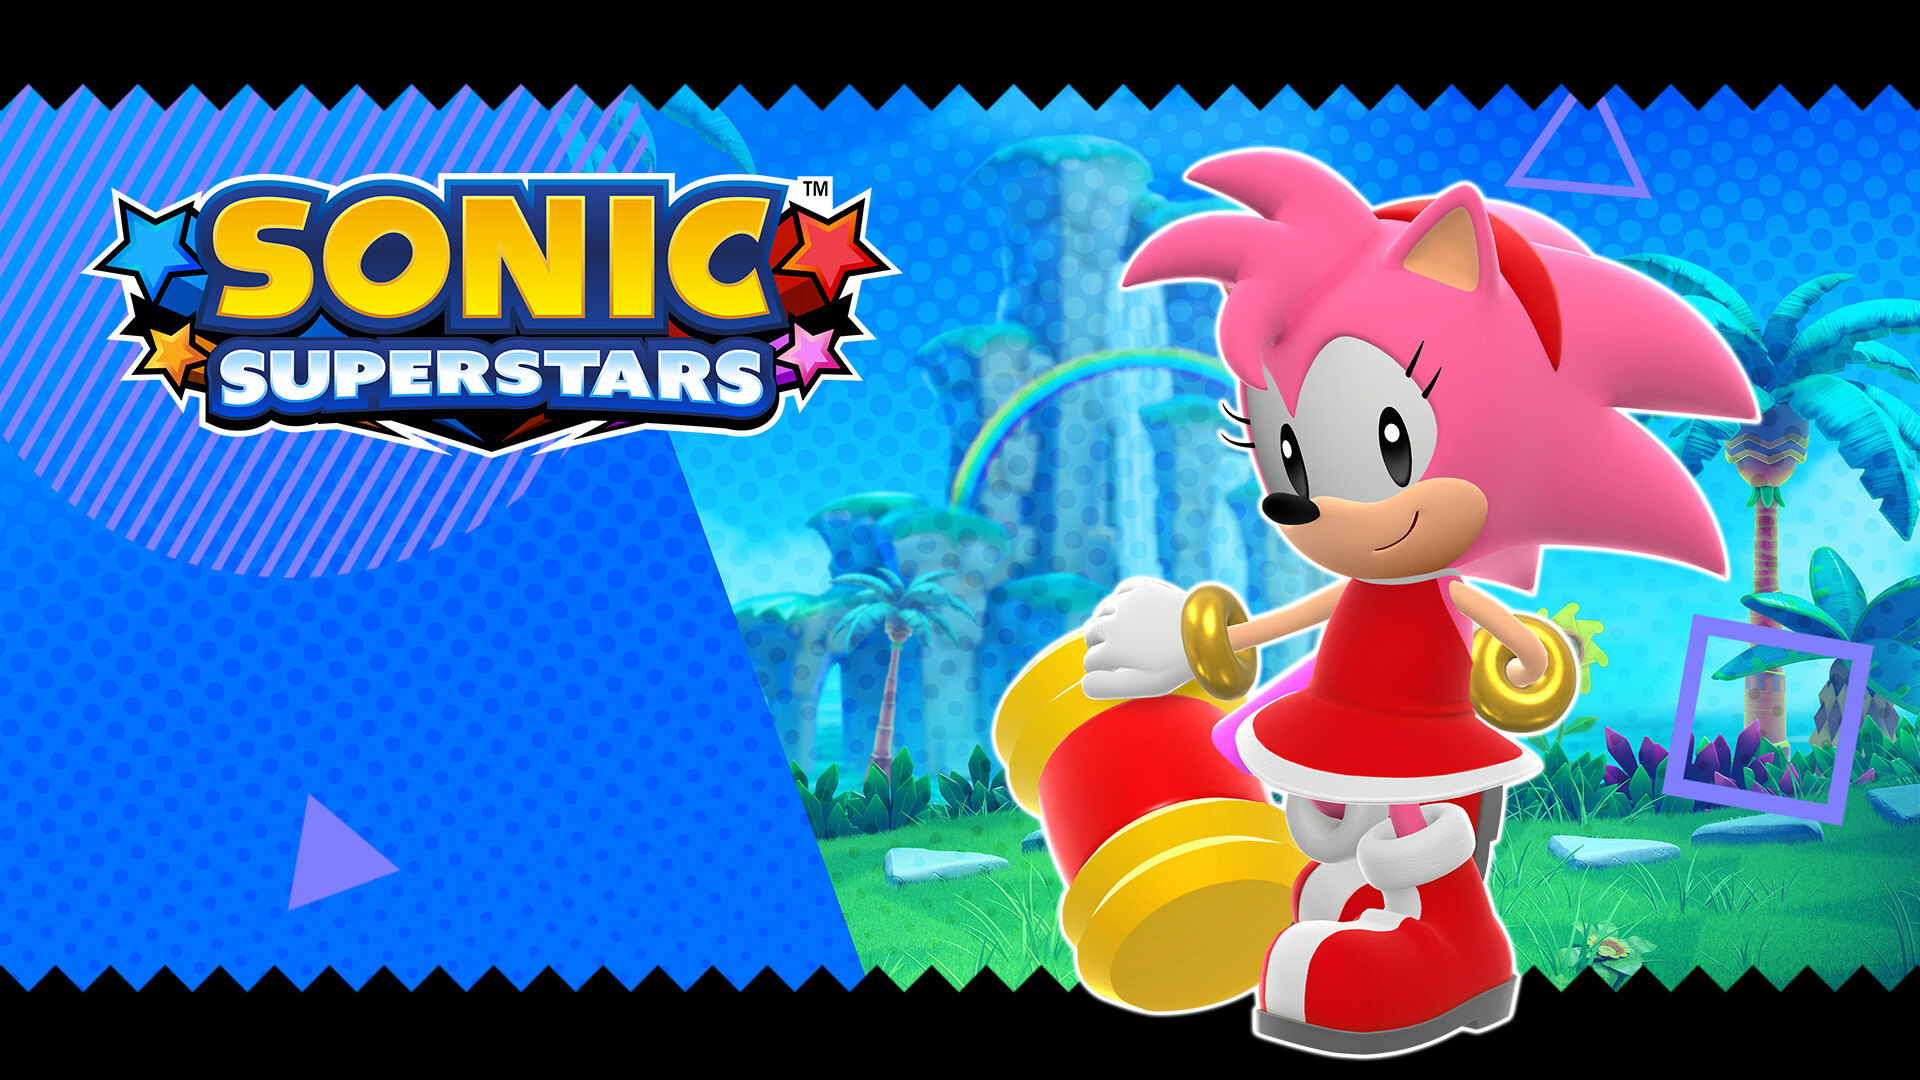 Sonic Superstars Modern Amy Skin Now Free on PC via Steam Until Later this Month